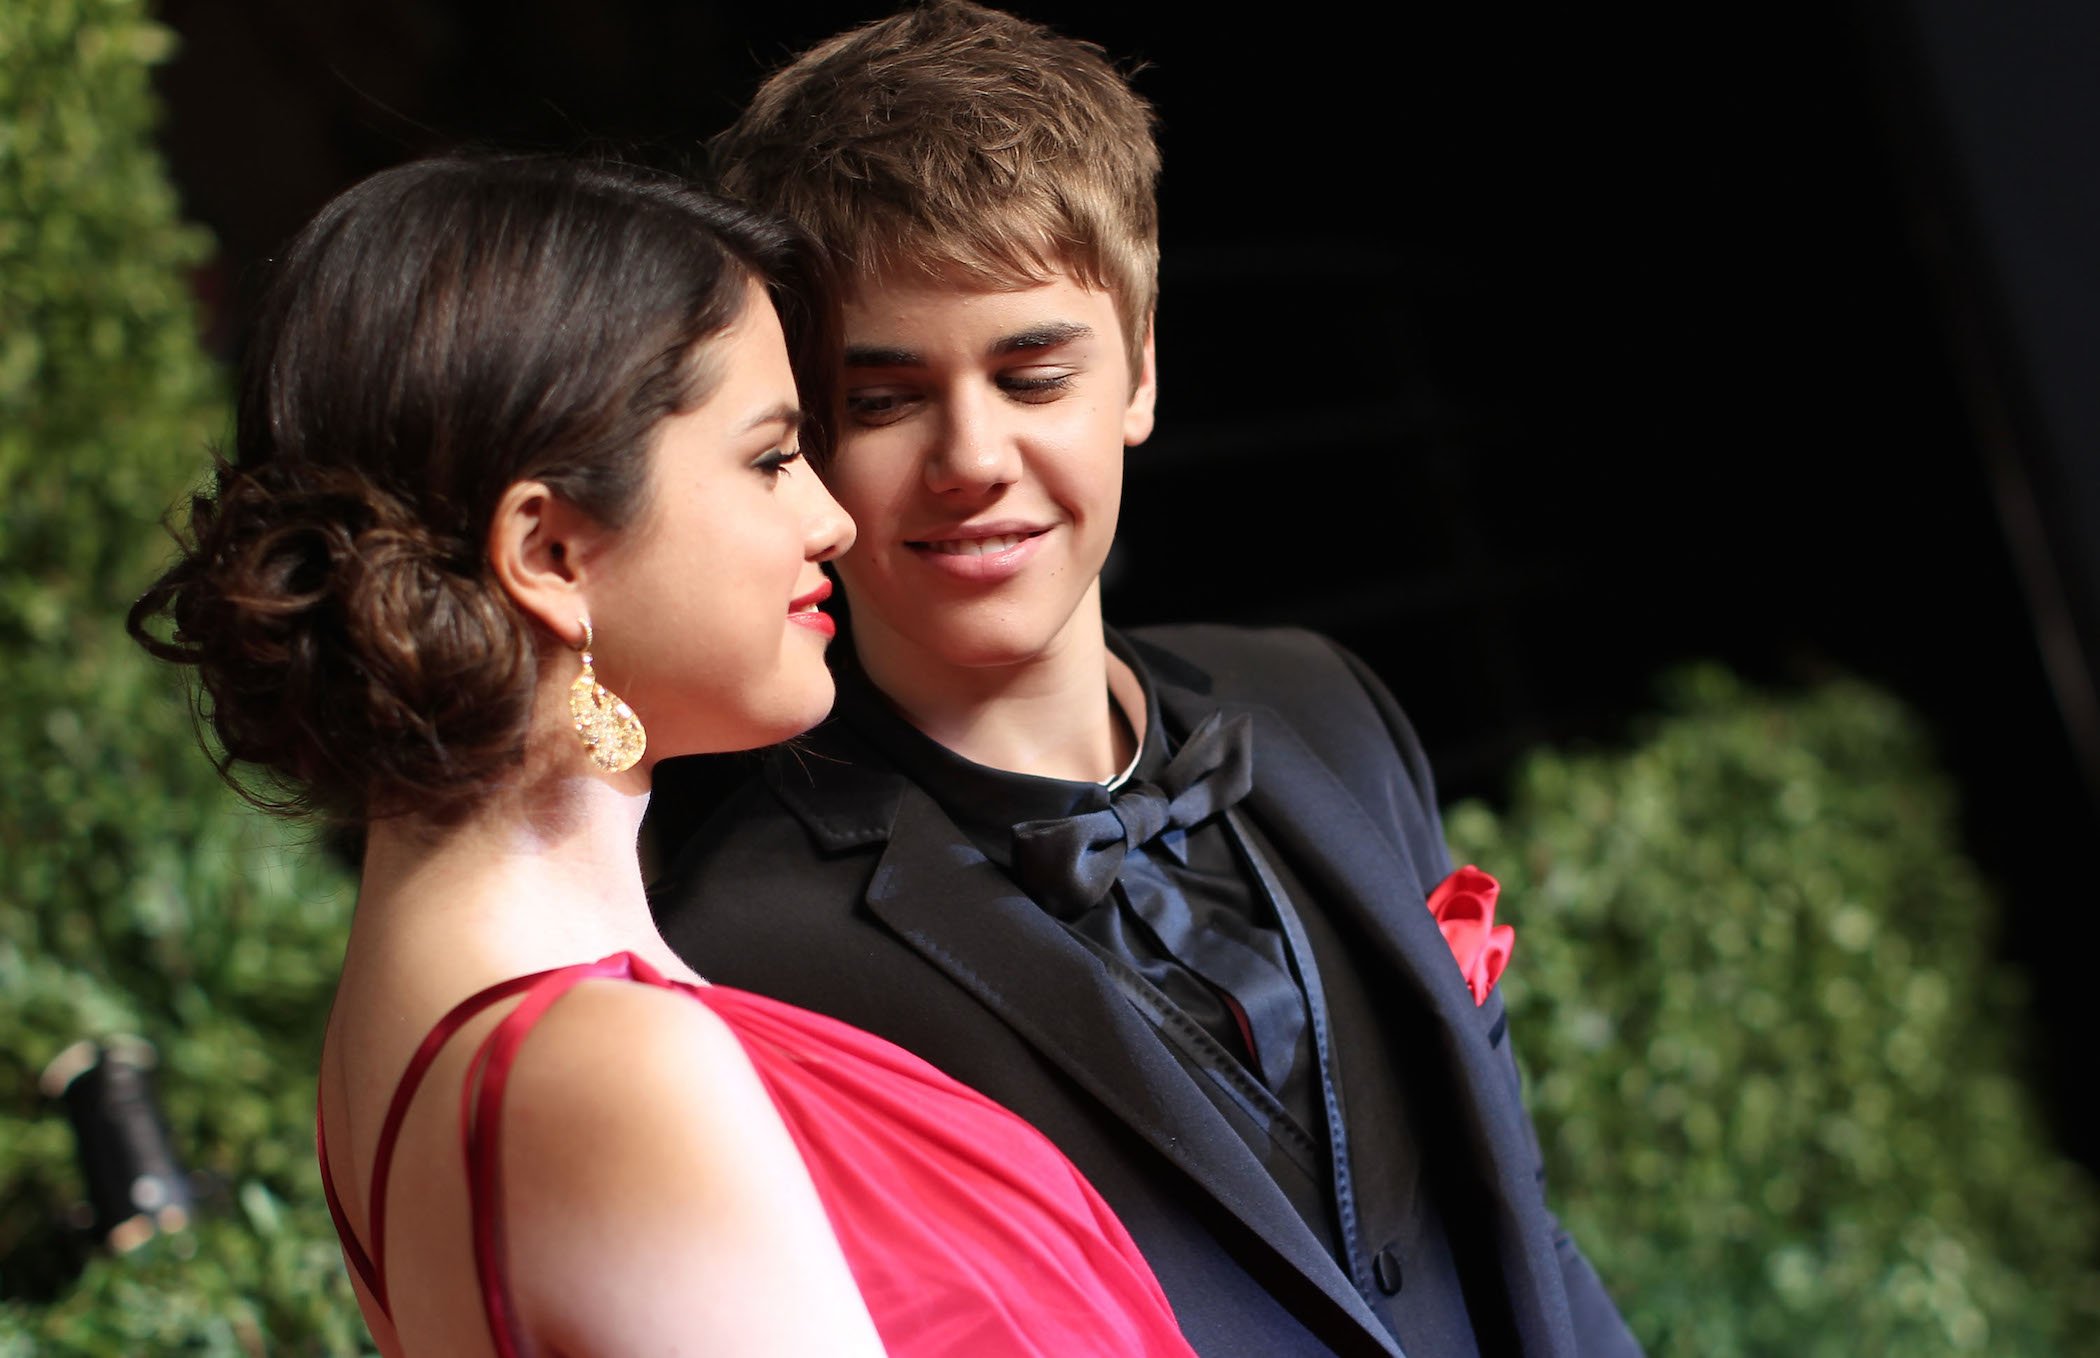 Selena Gomez and musician Justin Bieber attend the 2011 Vanity Fair Oscar Party